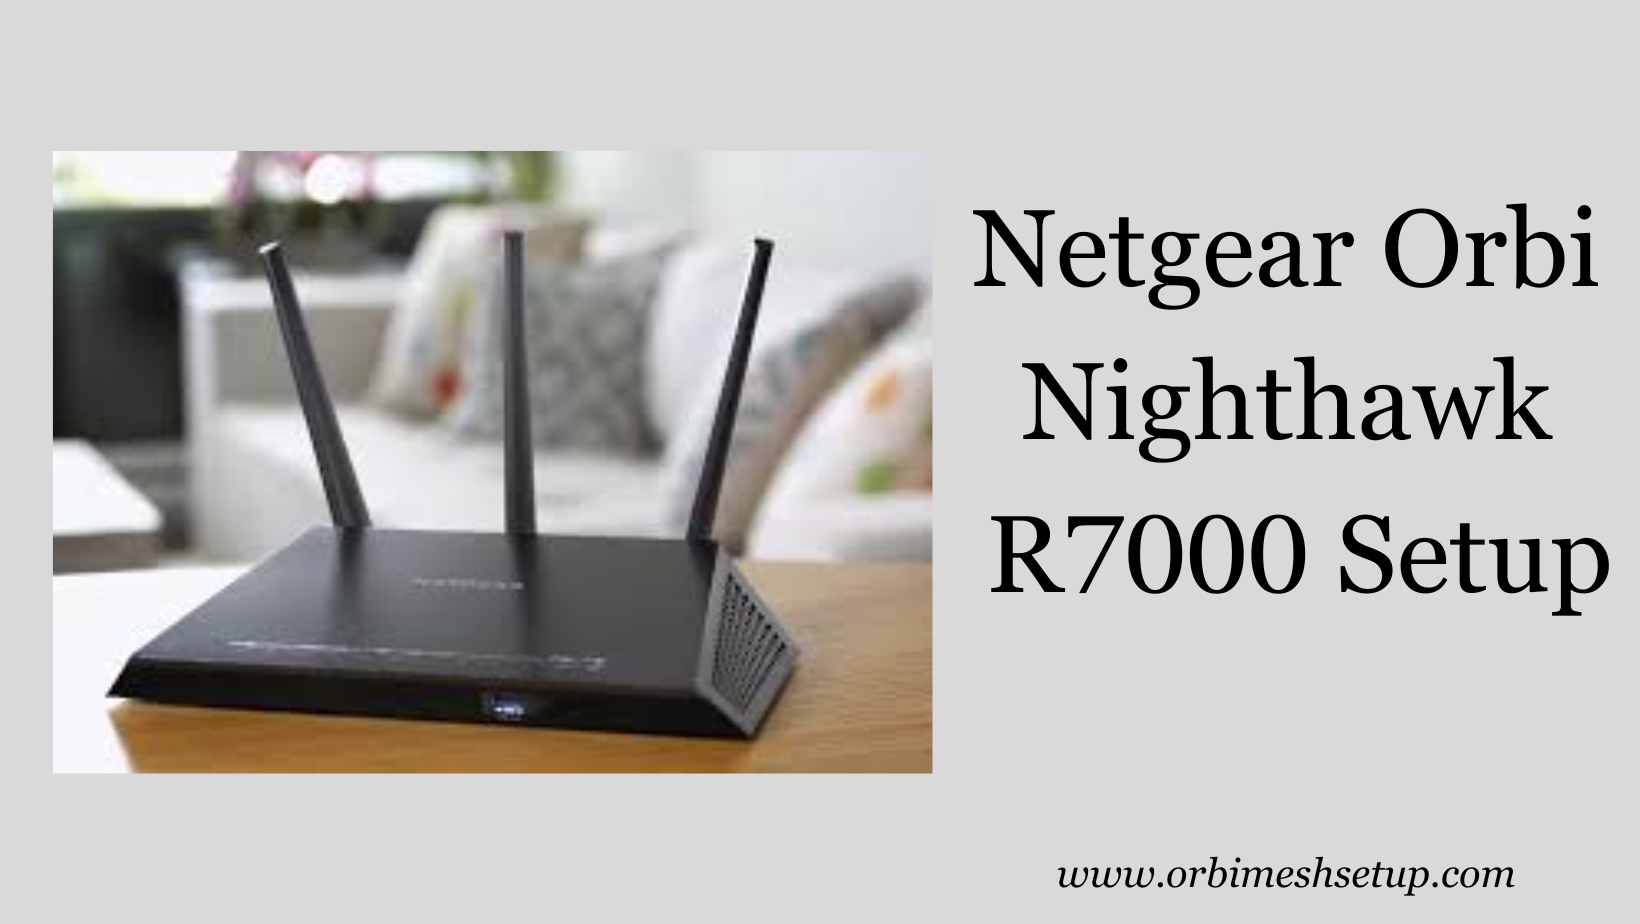 You are currently viewing Netgear Orbi Nighthawk R7000 Setup guide 